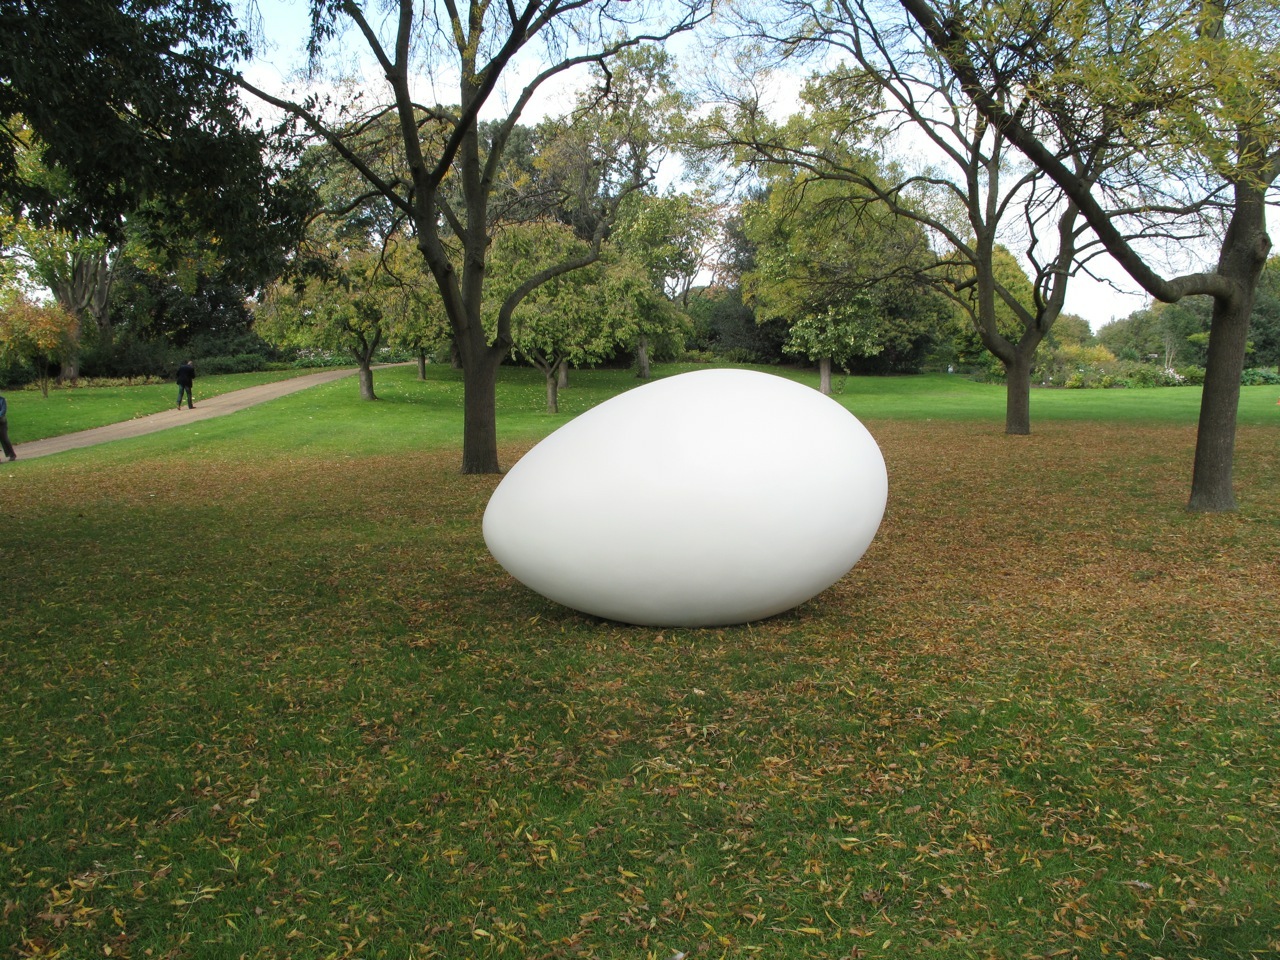 A large egg sculpture sits on a field in what looks like a public park